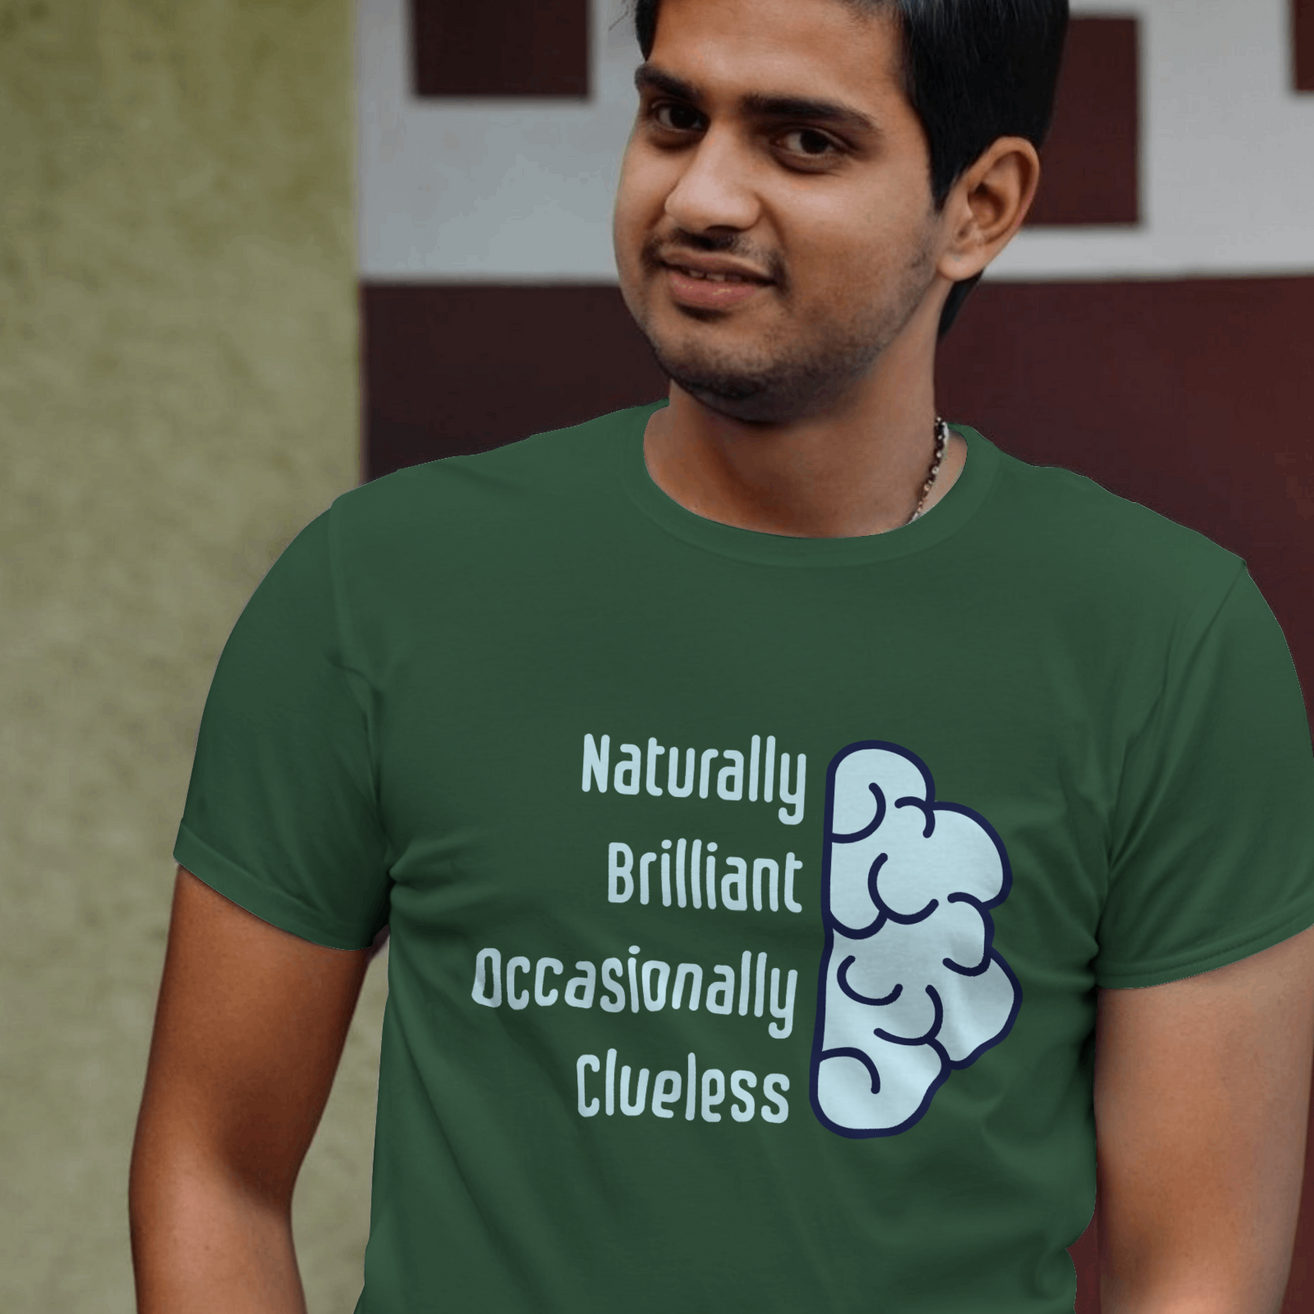 Naturally Brilliant Occasionally Clueless Men's Graphic T-Shirt